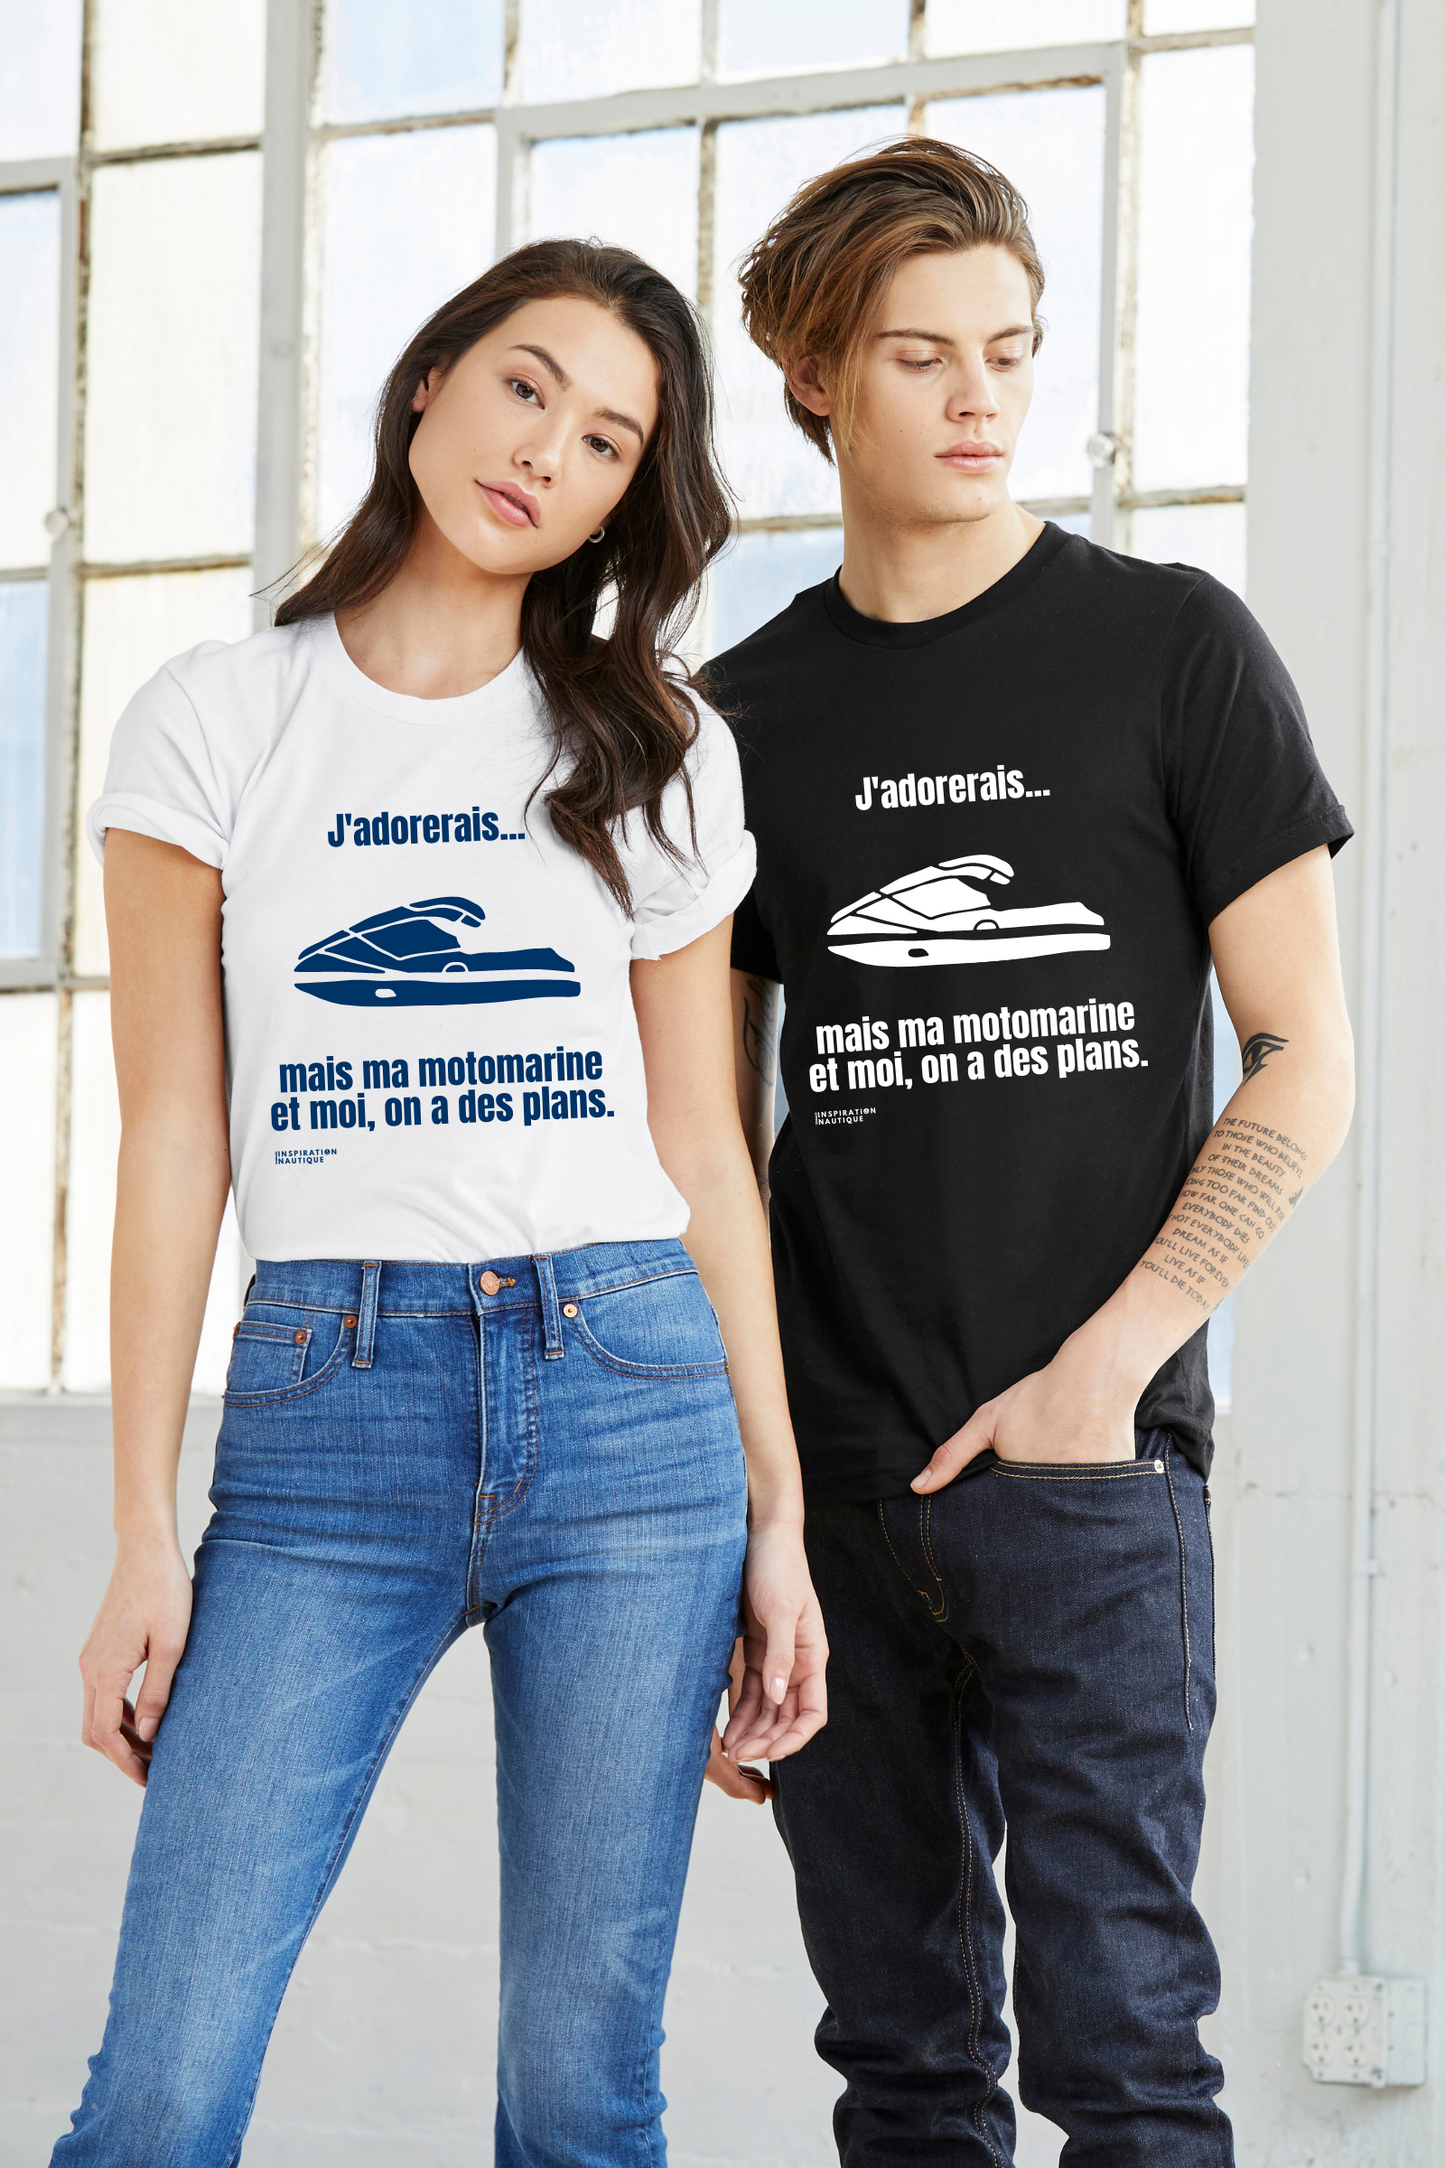 Unisex t-shirt: I would love to... but my watercraft and I have plans - Visual marine